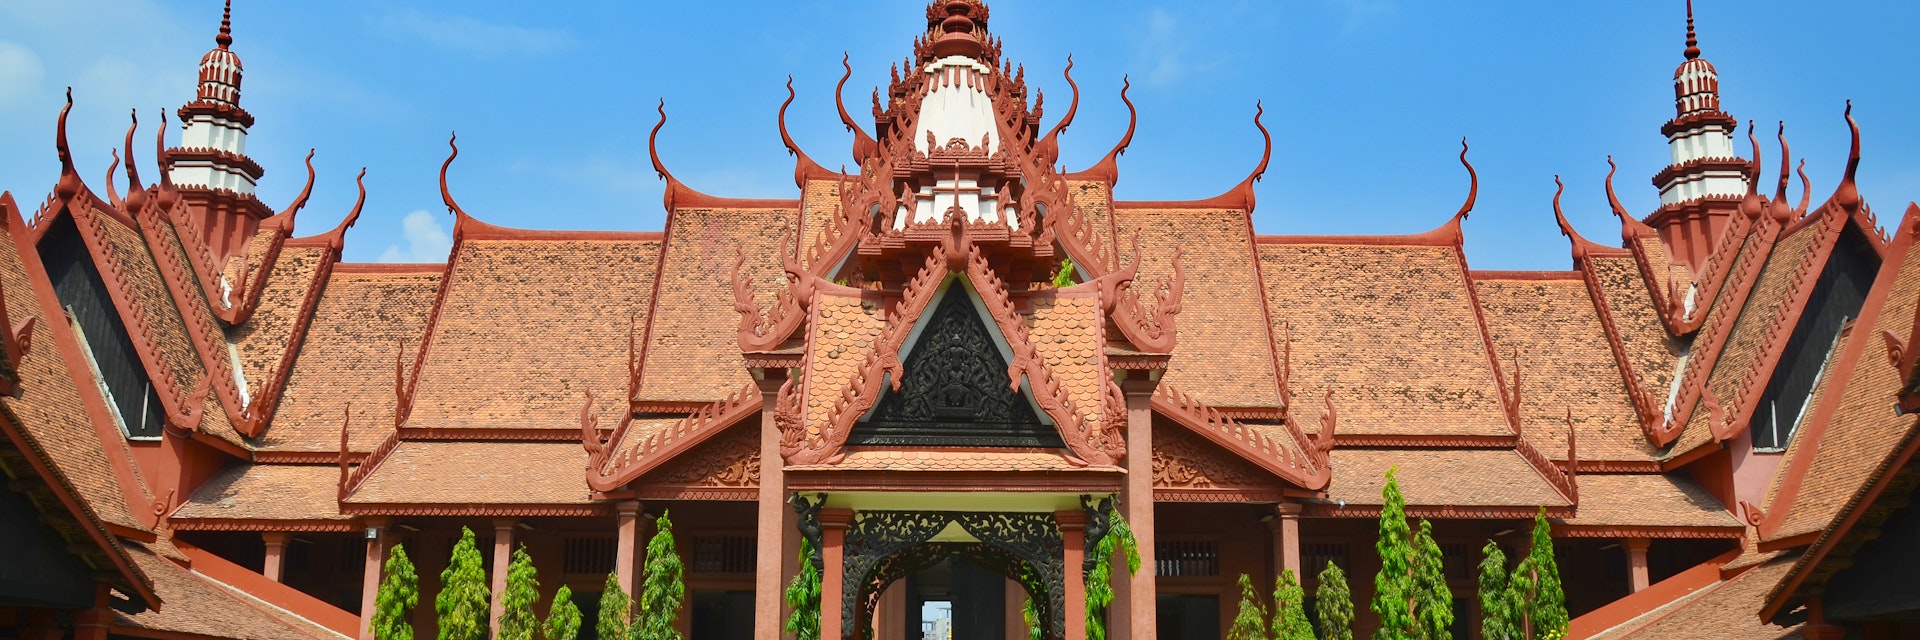 The National Museum of Cambodia (Sala Rachana) in Phnom Penh is Cambodia's largest museum of cultural history and is the country's leading historical and archaeological museum.